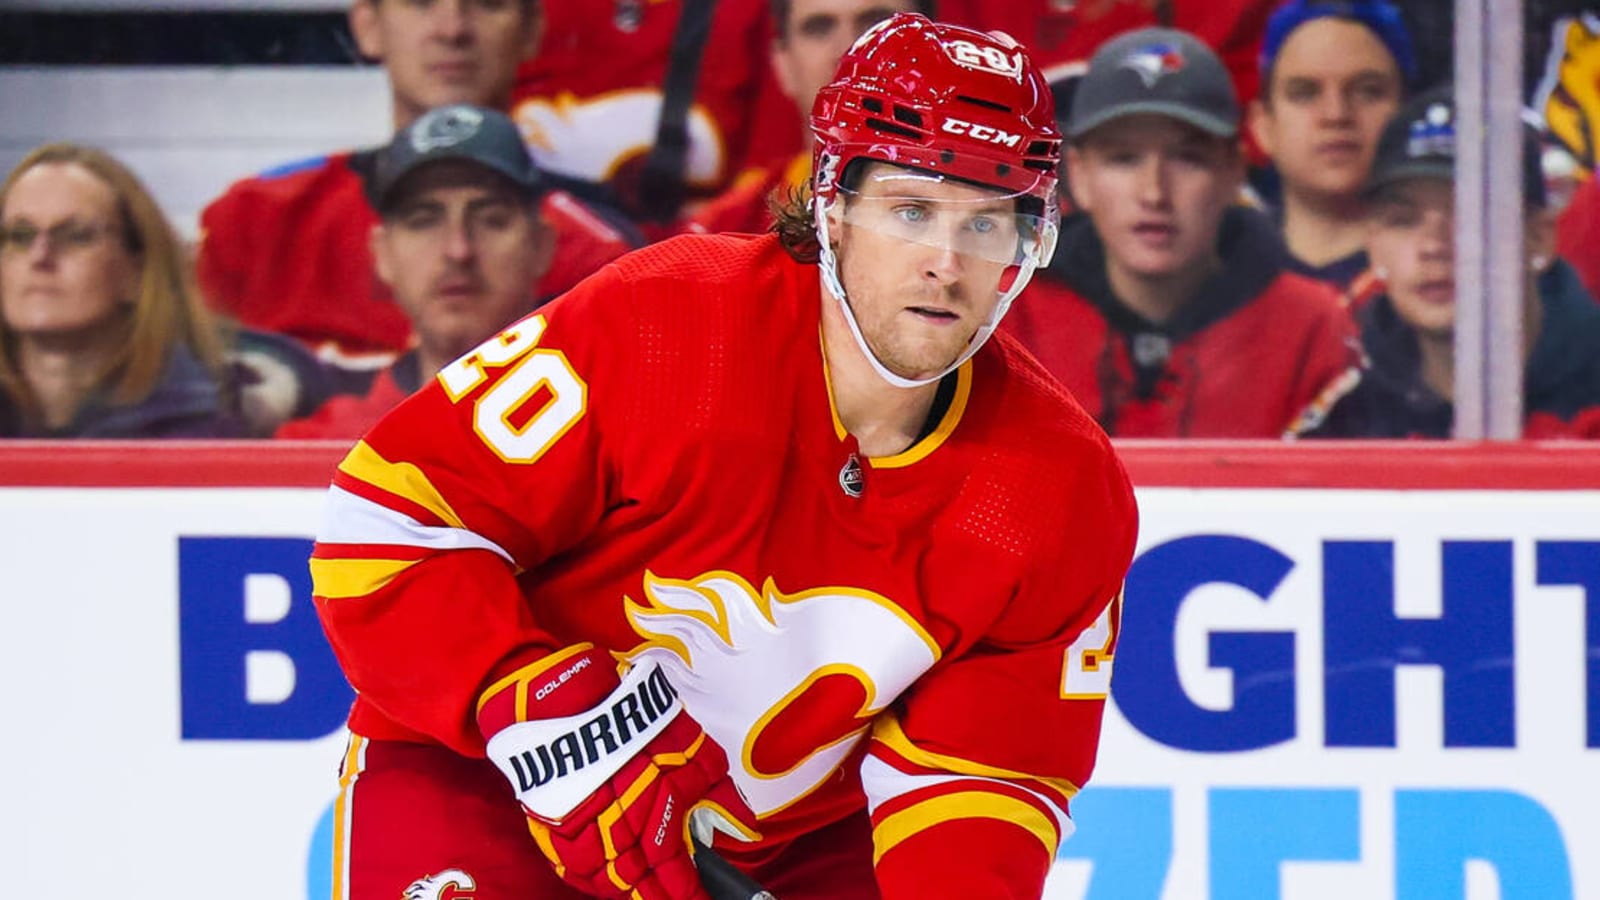 Flames forward Blake Coleman fined $5,000 for slew-footing